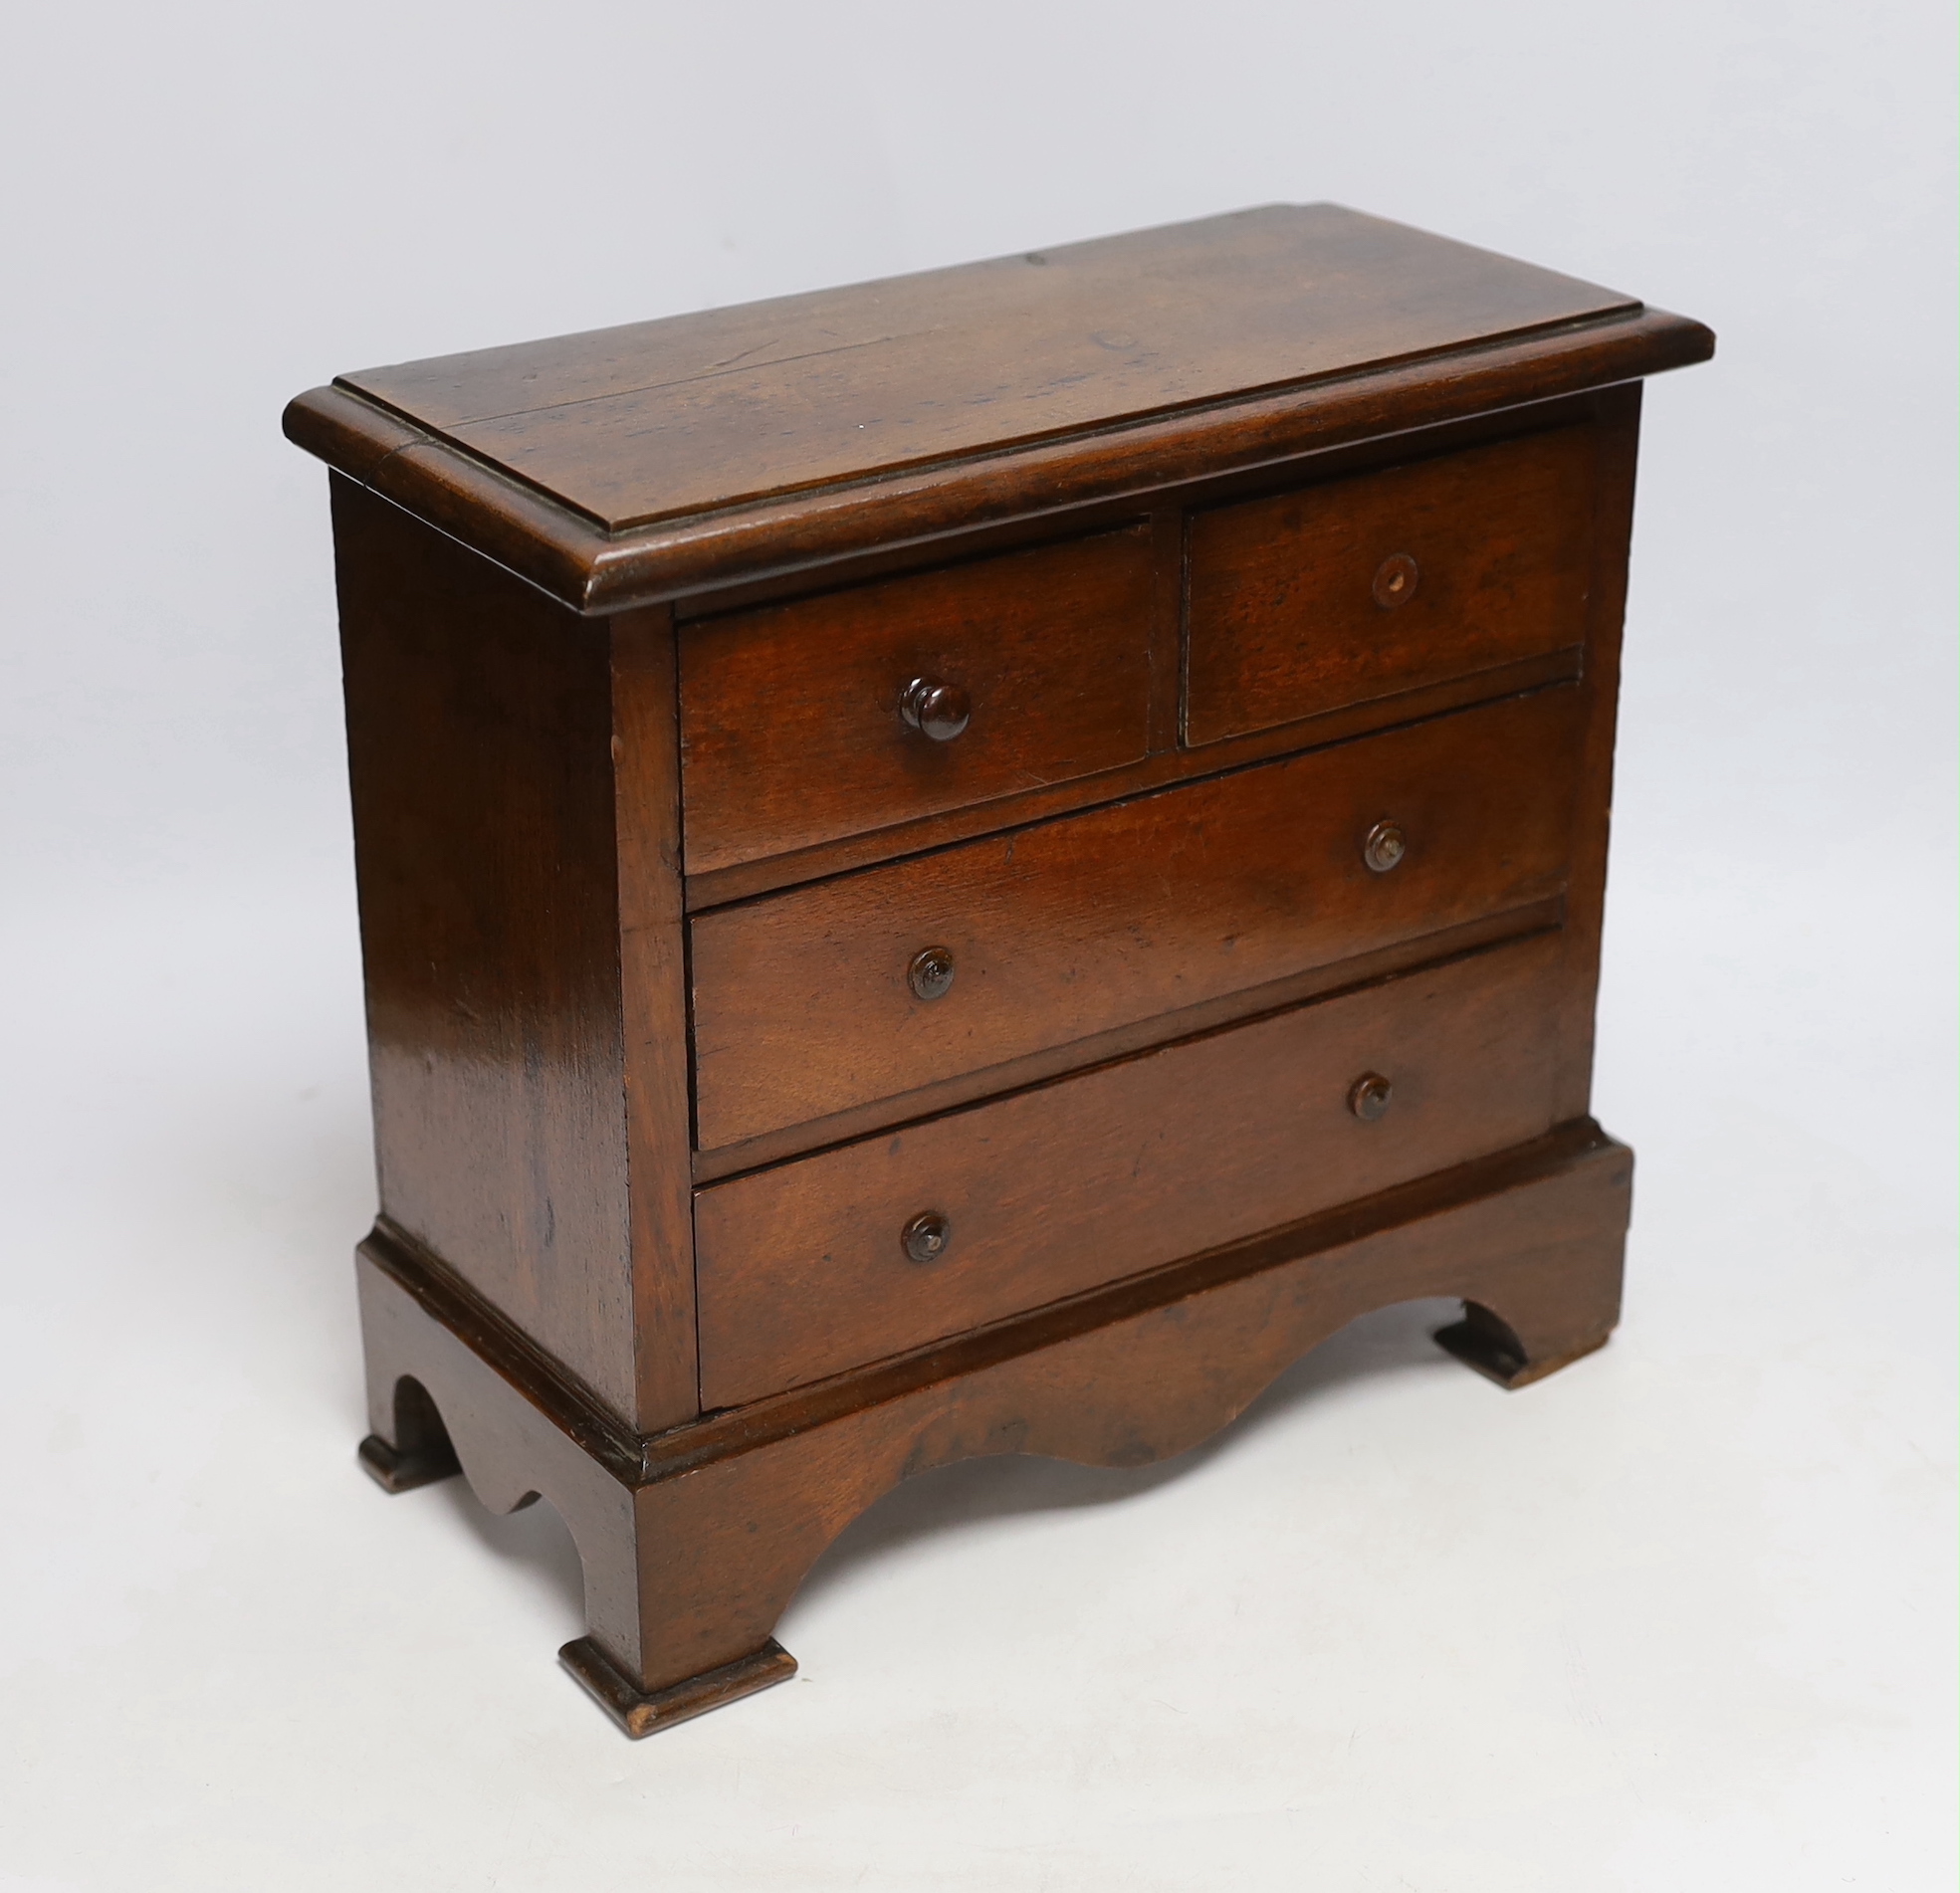 A Victorian miniature mahogany chest of drawers, 26cm high x 28cm wide